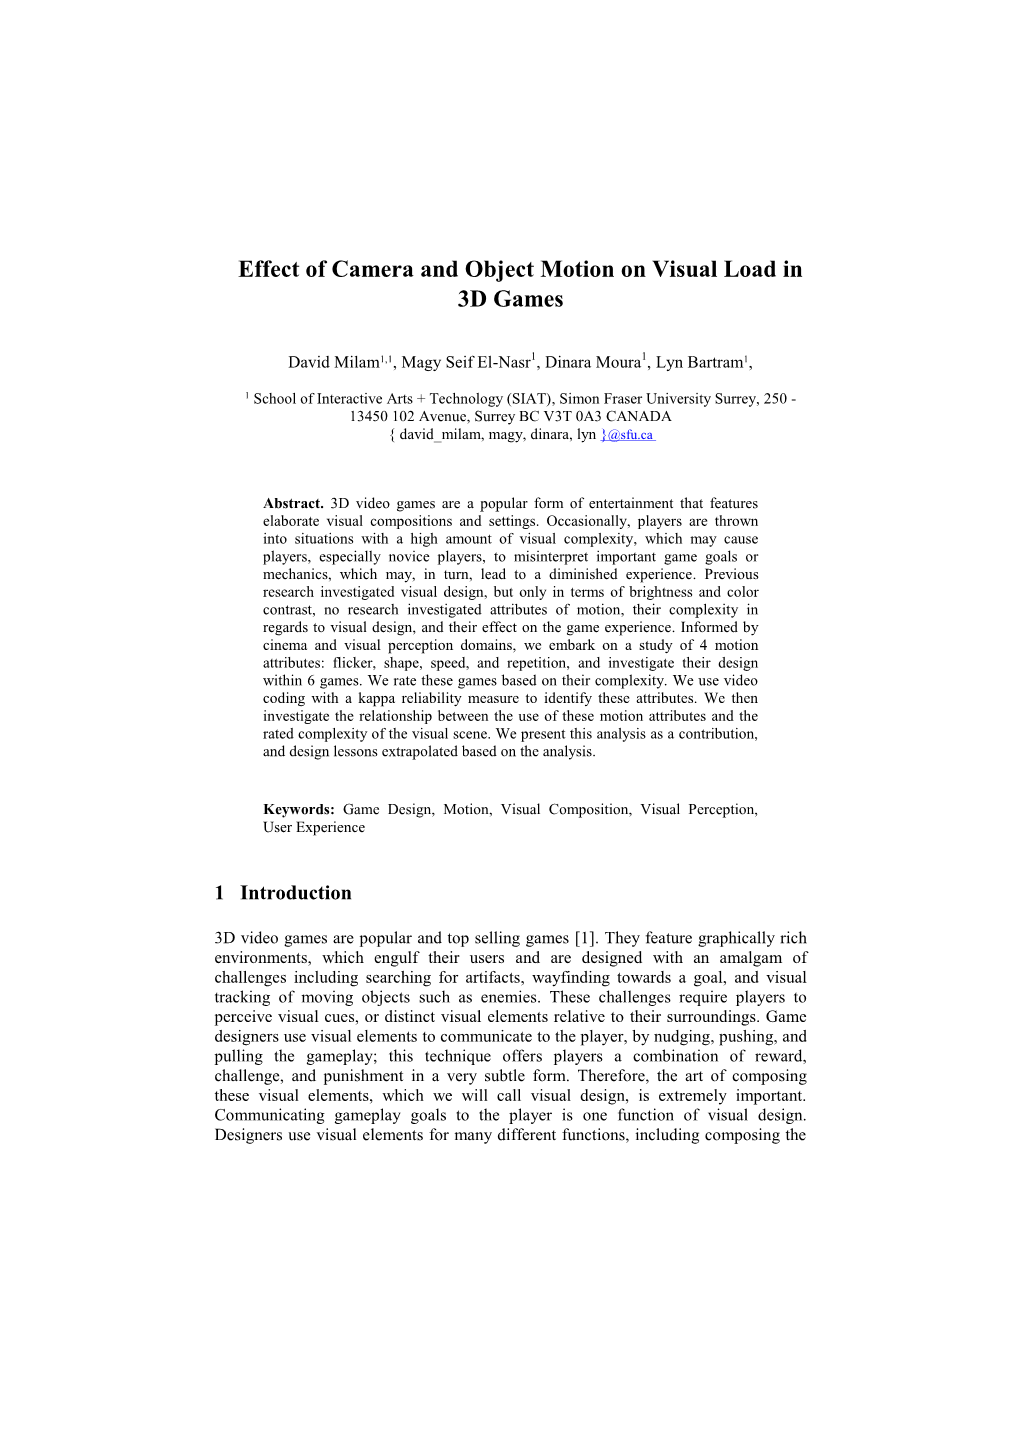 Effect of Camera and Object Motion on Visual Load in 3D Games